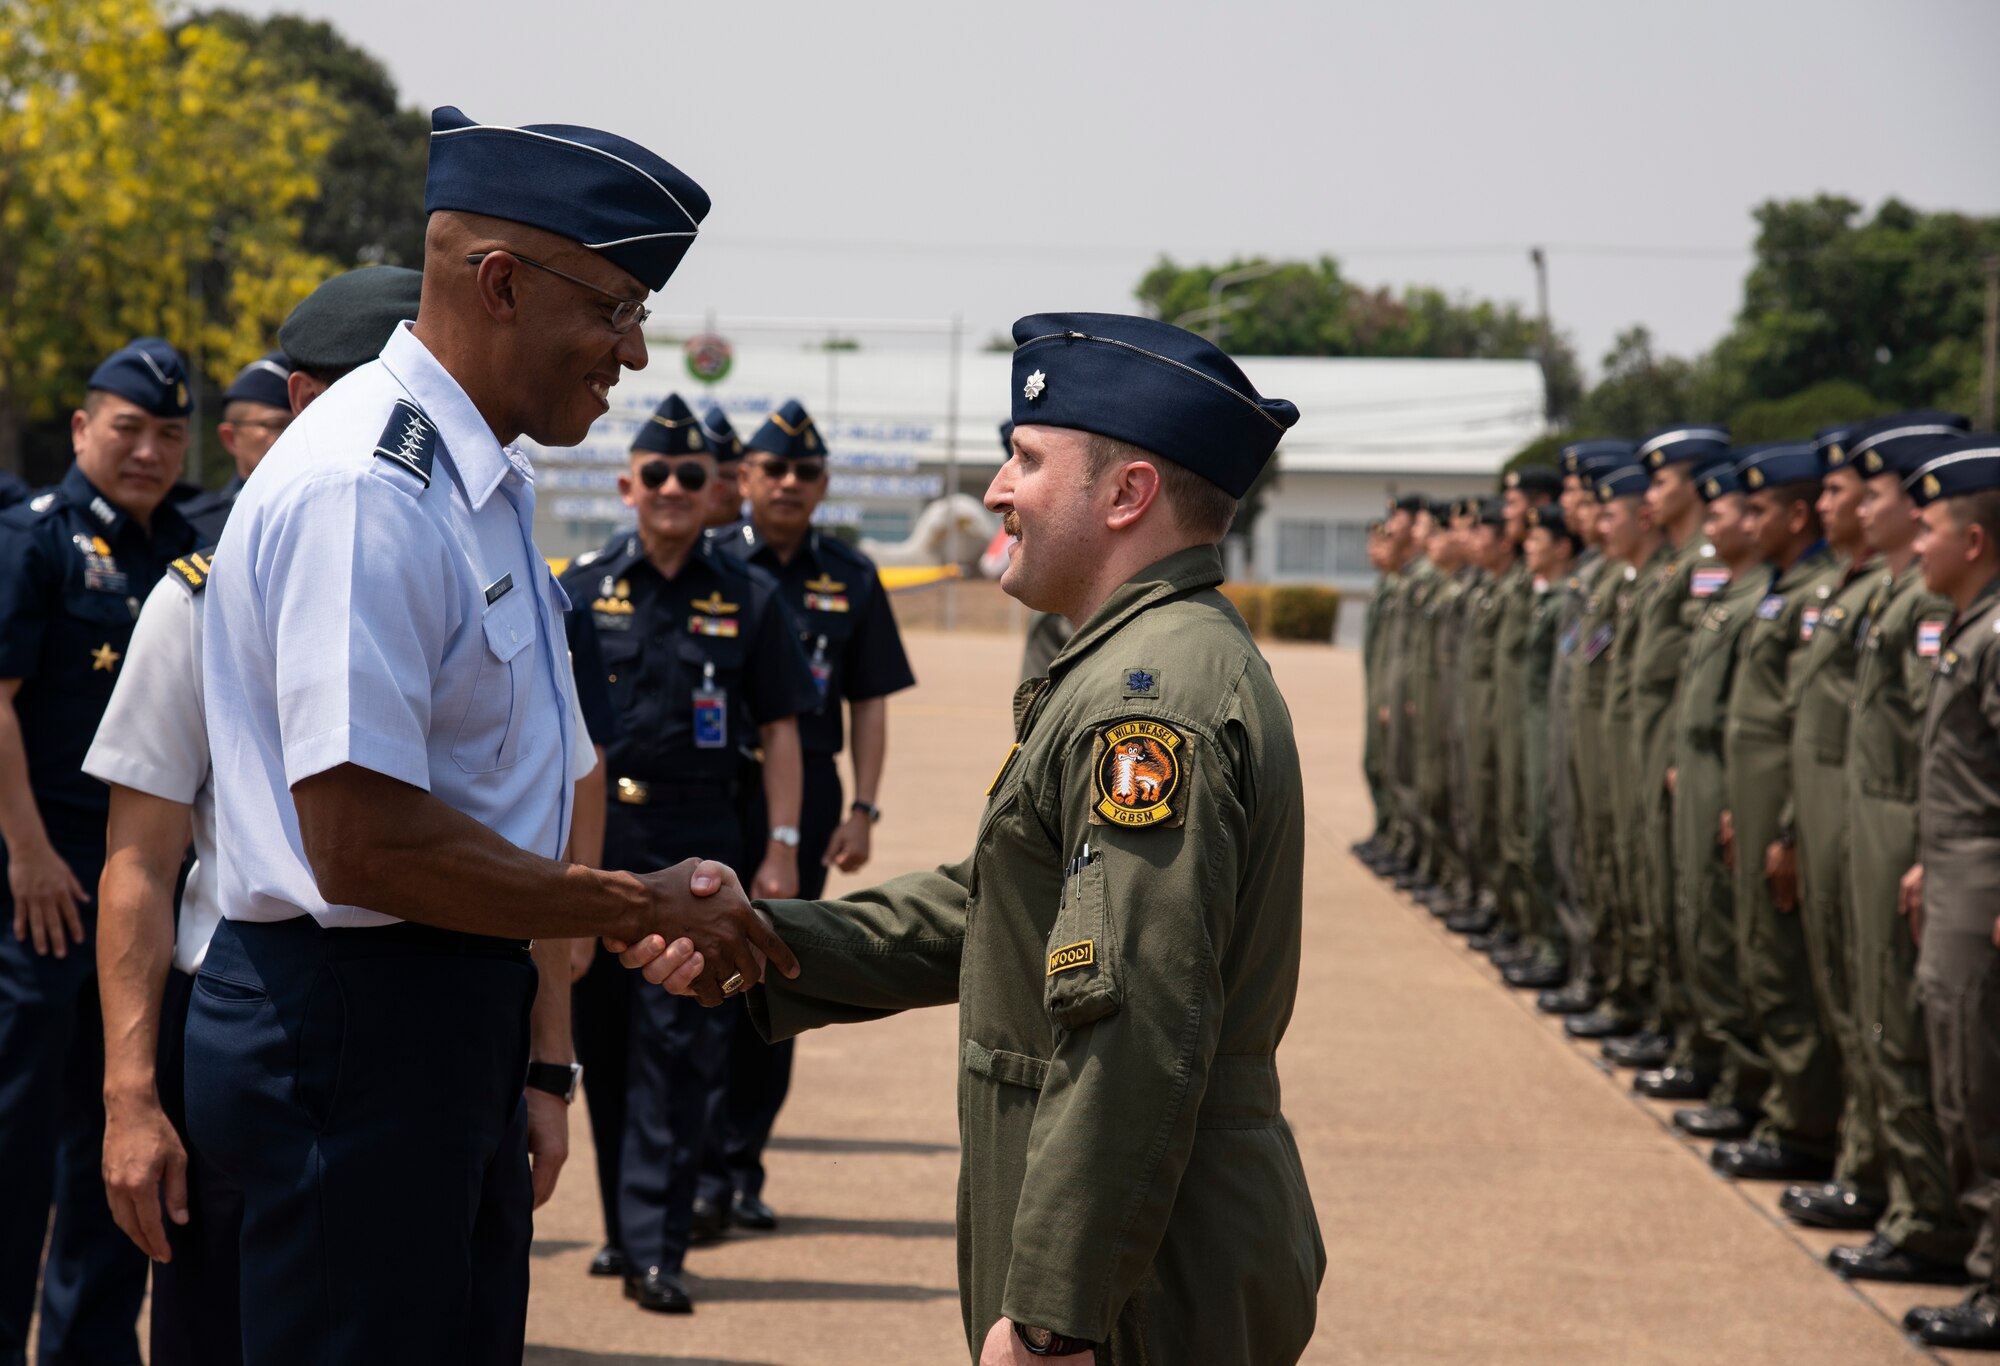 U.S. Air Force Gen. CQ Brown Jr., Pacific Air Forces commander, shakes hands with Lt. Col. Matthew Kenkel, 14th Fighter Squadron commander following the closing ceremony for COPE Tiger 2019 at Korat Royal Thai Air Force Base, Thailand, March 22, 2019.